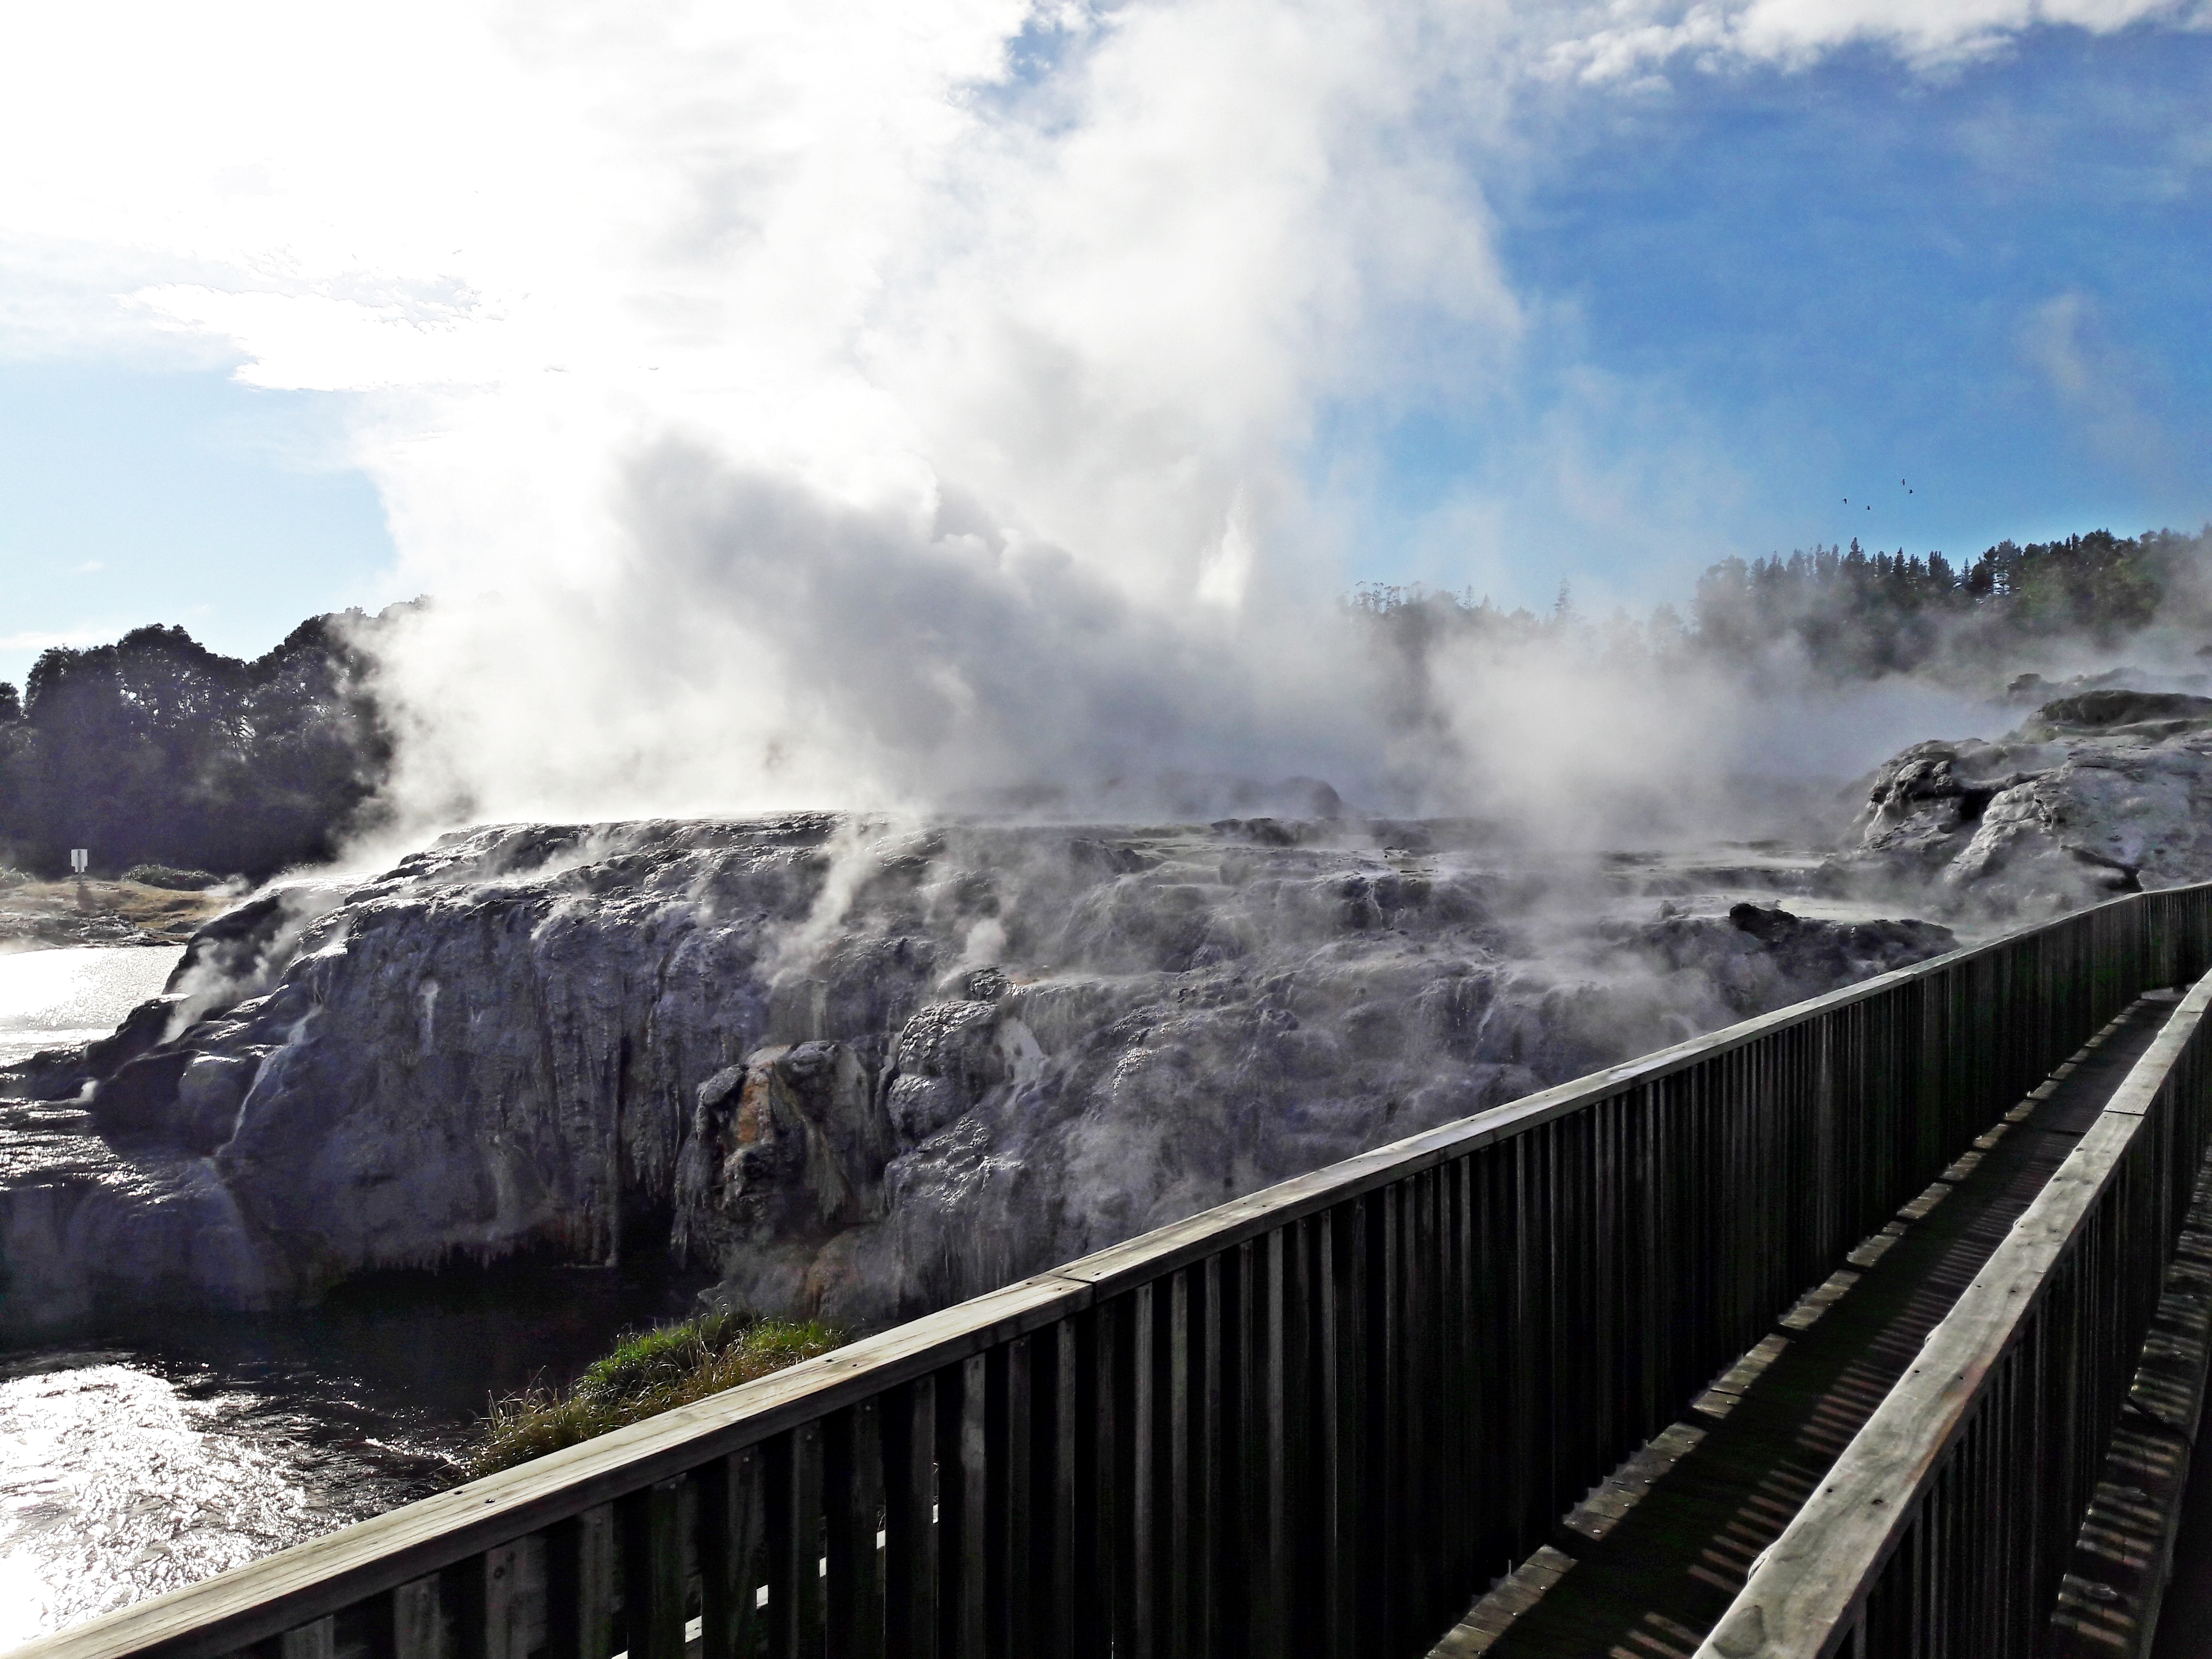 Steam emanating from the Te Puia geyser